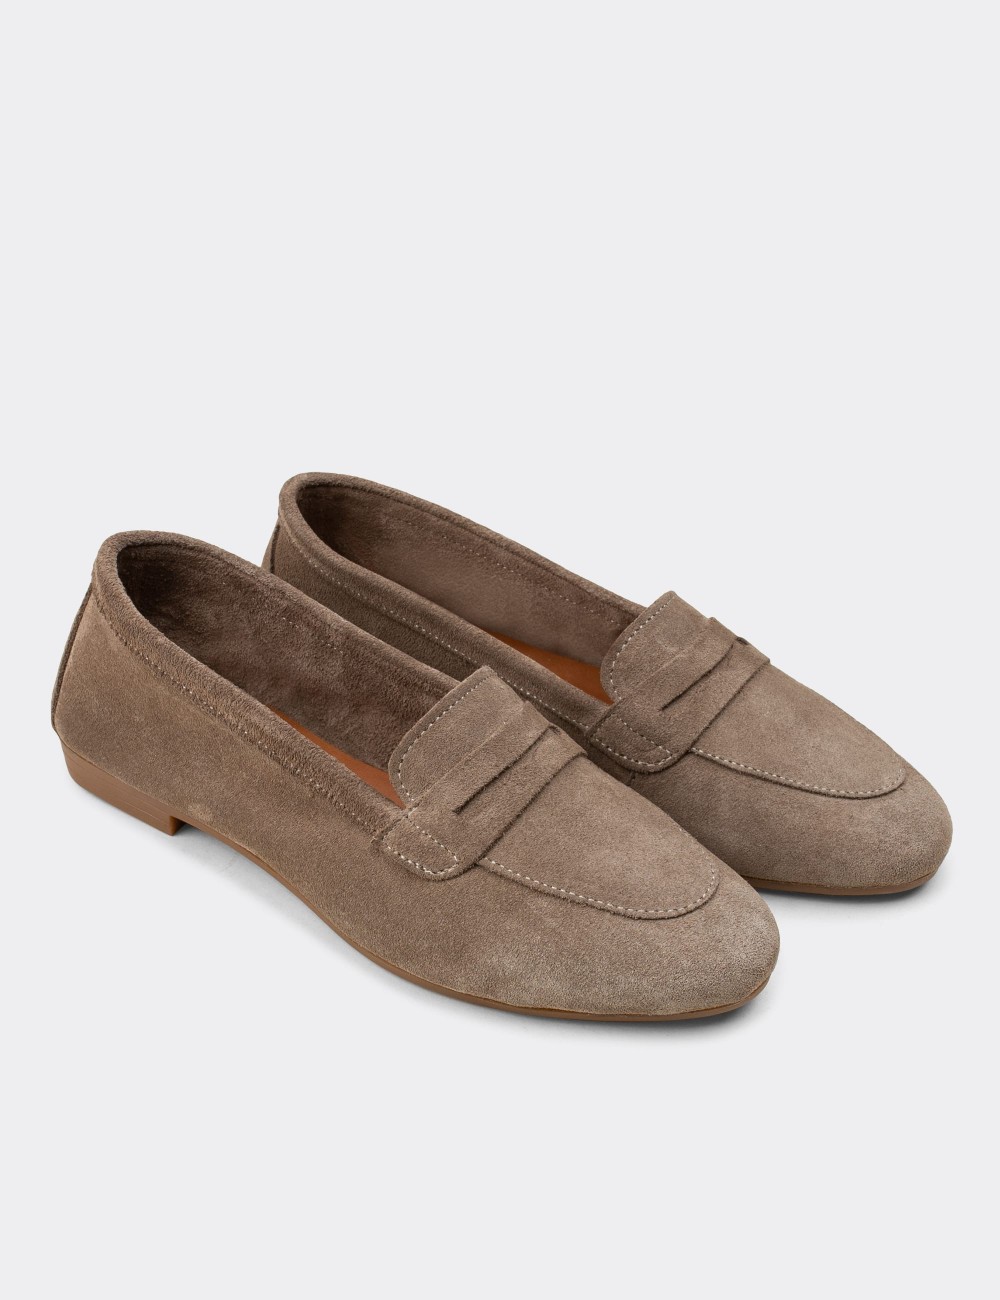 Sandstone Suede Leather Loafers - E3202ZVZNC03